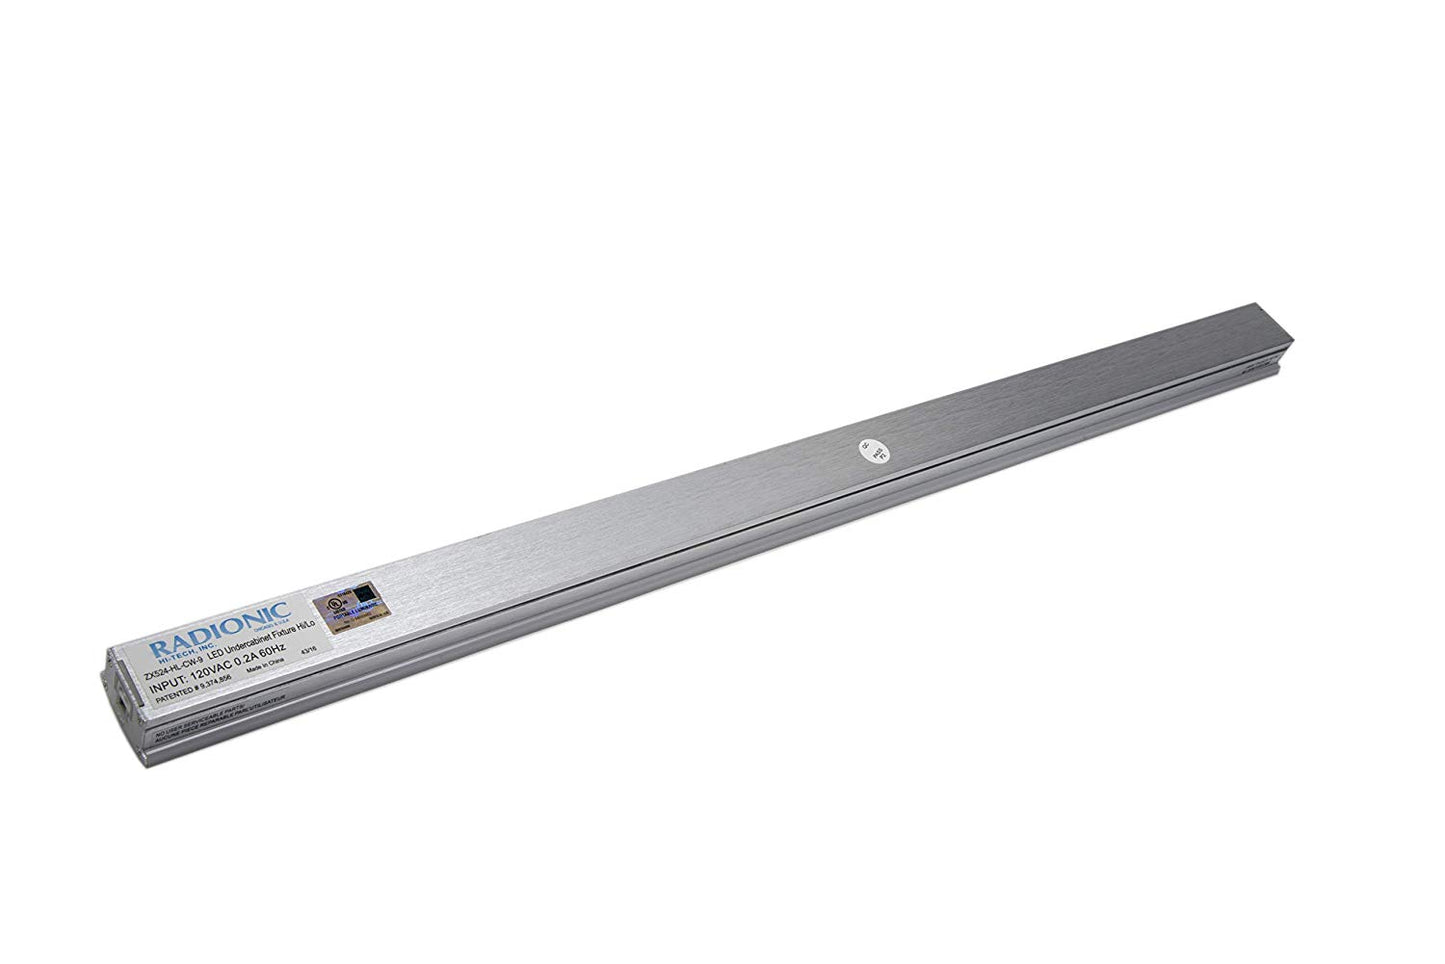 ZX524-HL-CW-9, LED, Task/Accent, Frosted Lens, Hi/Low Switch, 90 CRI, 4500K, 24"L, 9W